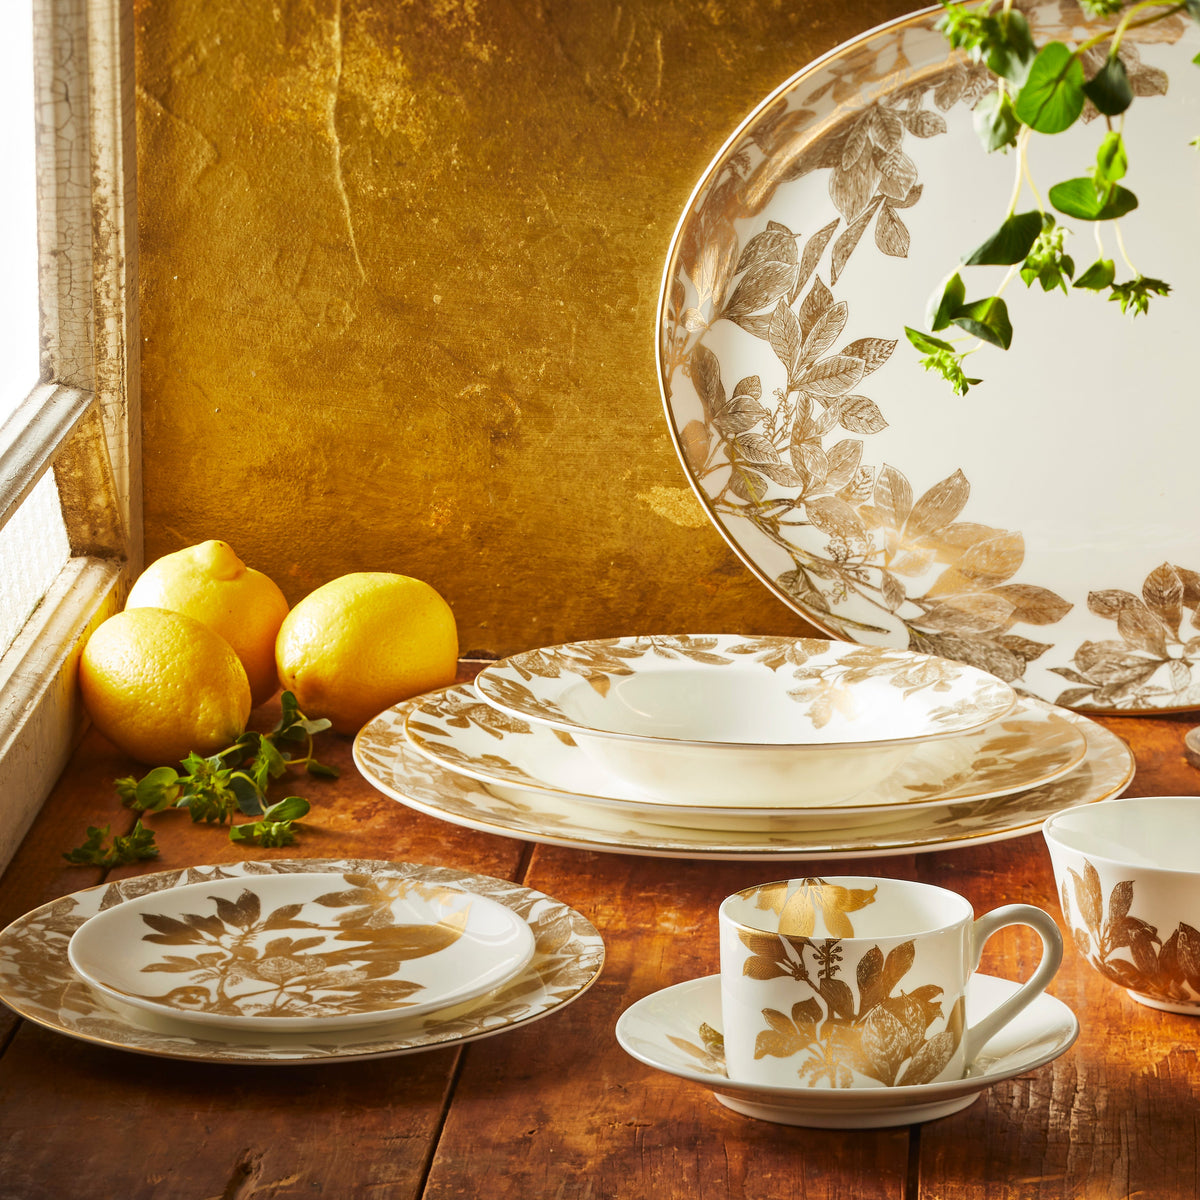 The Arbor Gold Salad Plate in Bone China from Caskata is just part of the complete collection featured here in a sunny window amongst lemons on a rustic tabletop.